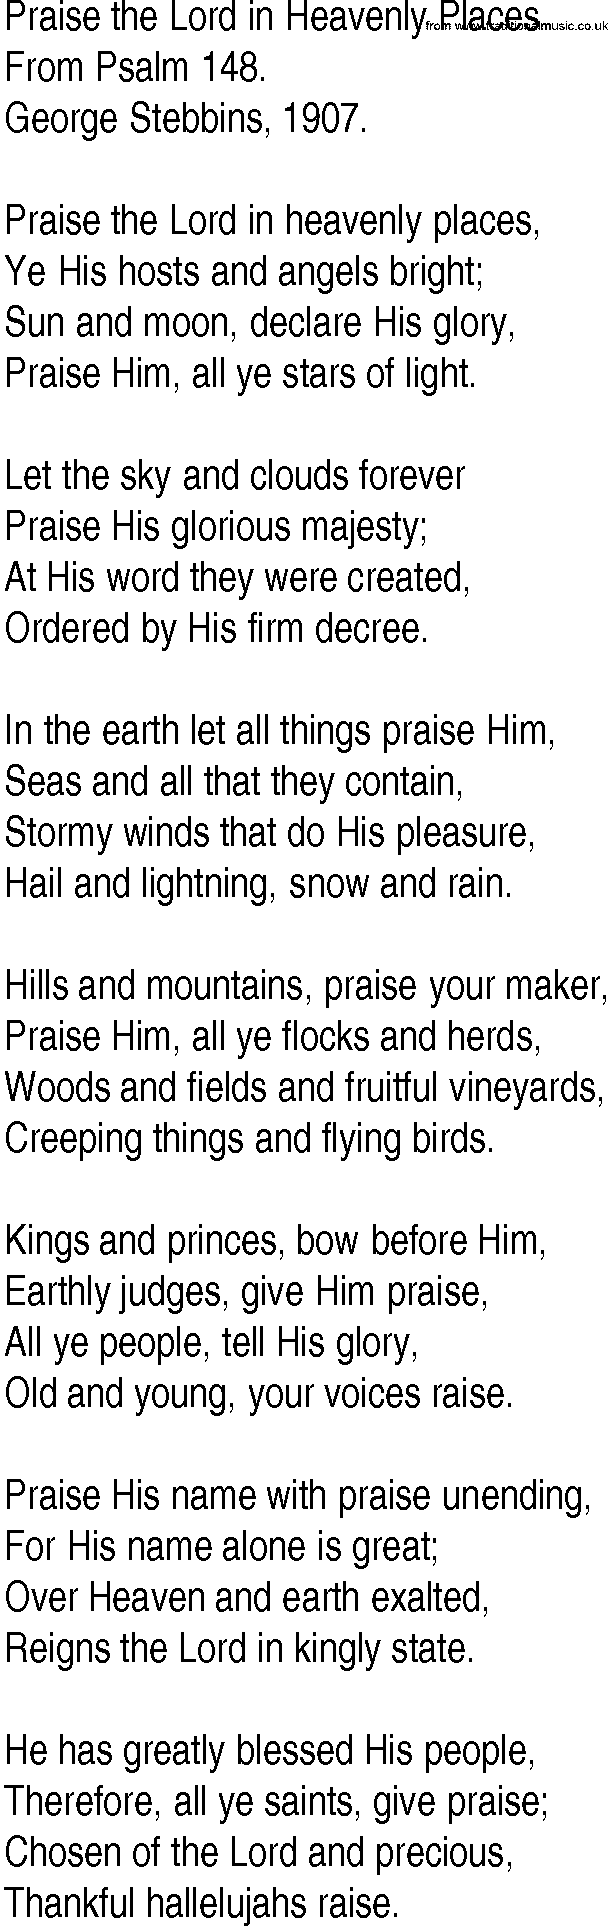 Hymn and Gospel Song: Praise the Lord in Heavenly Places by From Psalm lyrics